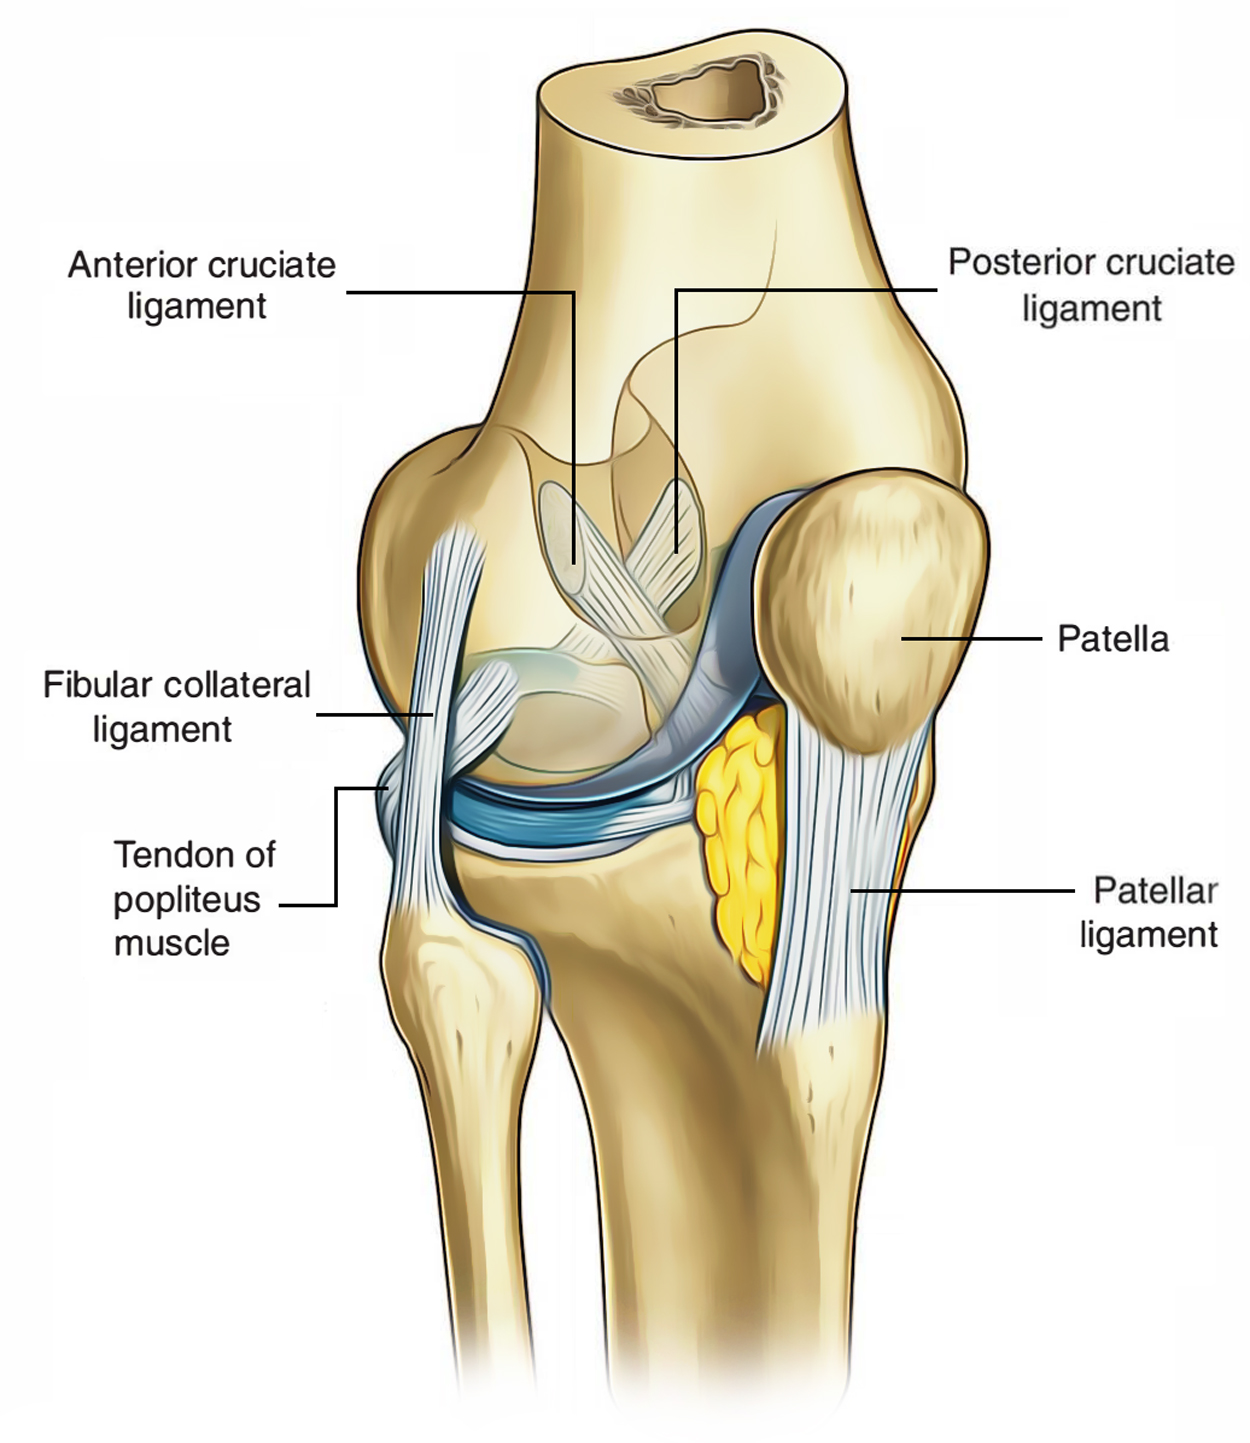 Ligaments of Knee Joint: Cruciate Ligament